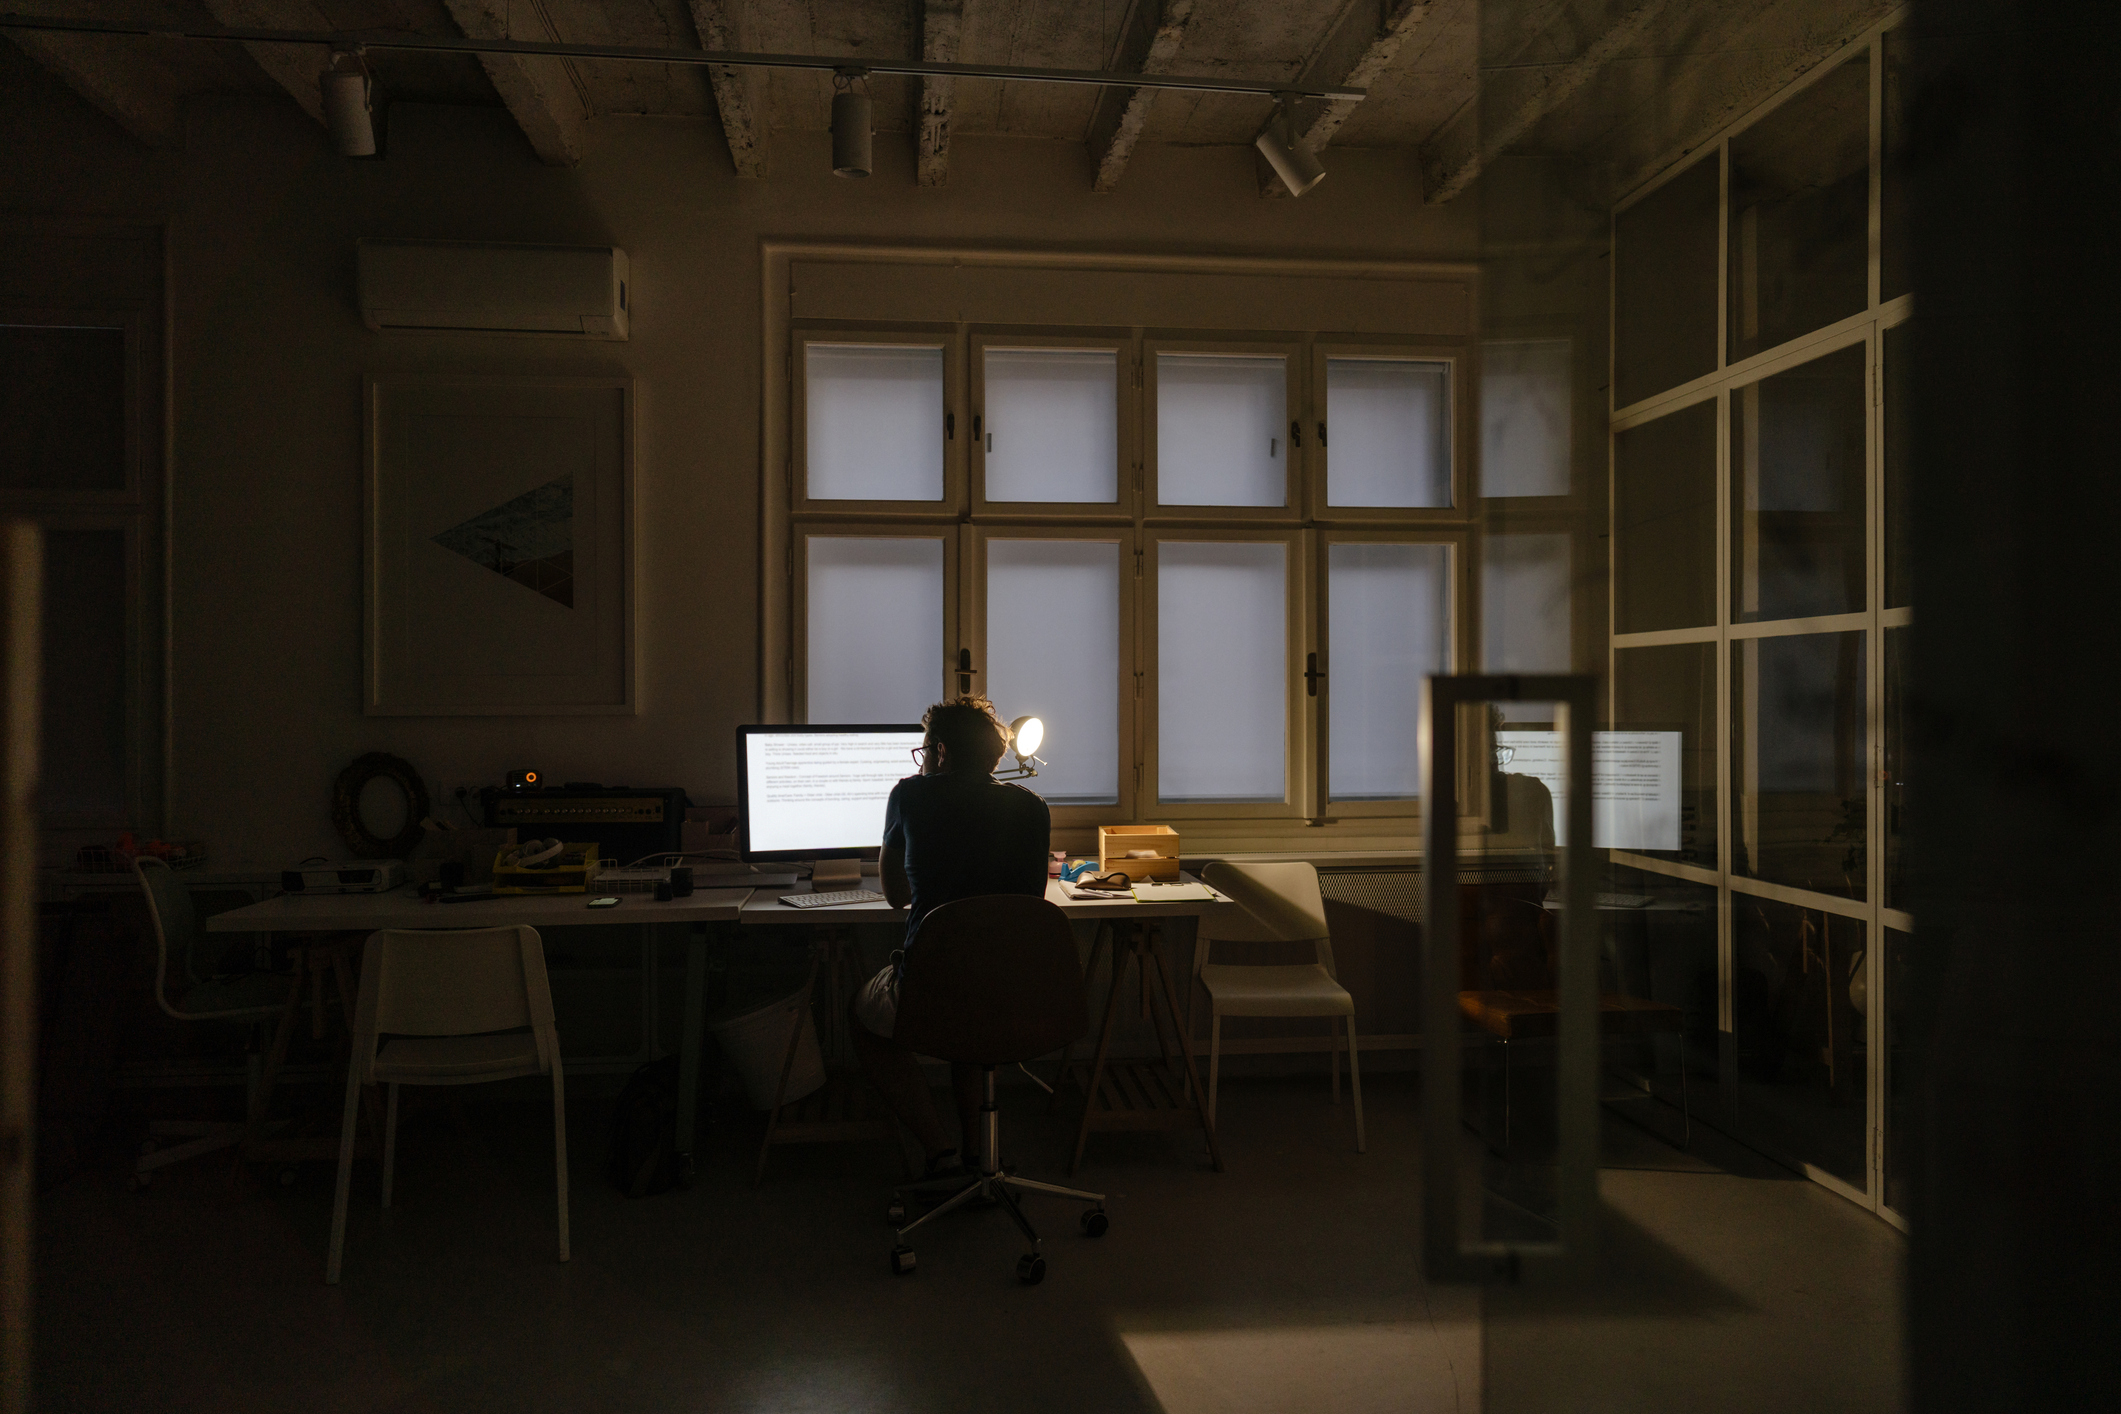 Photo of a man sitting at a desktop computer and working during a late-night shift